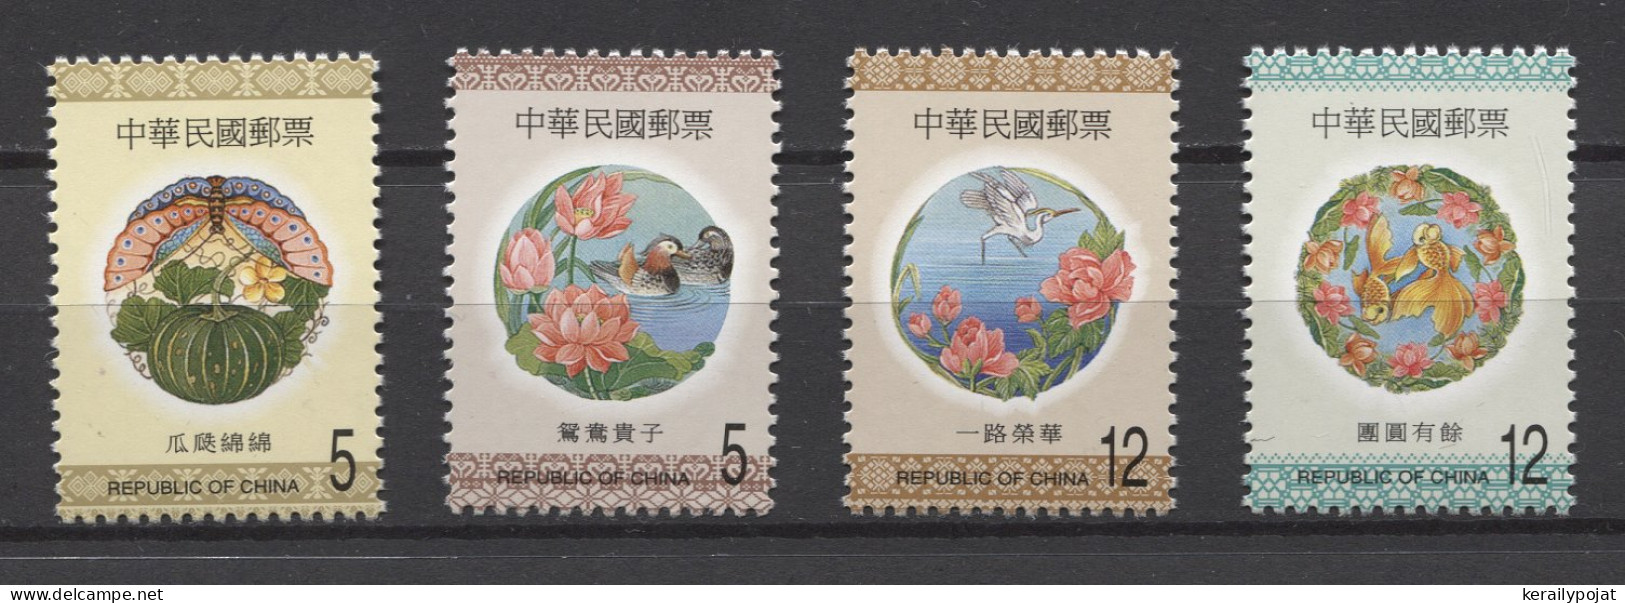 Taiwan - 1999 New Year's Wishes MNH__(TH-24844) - Unused Stamps